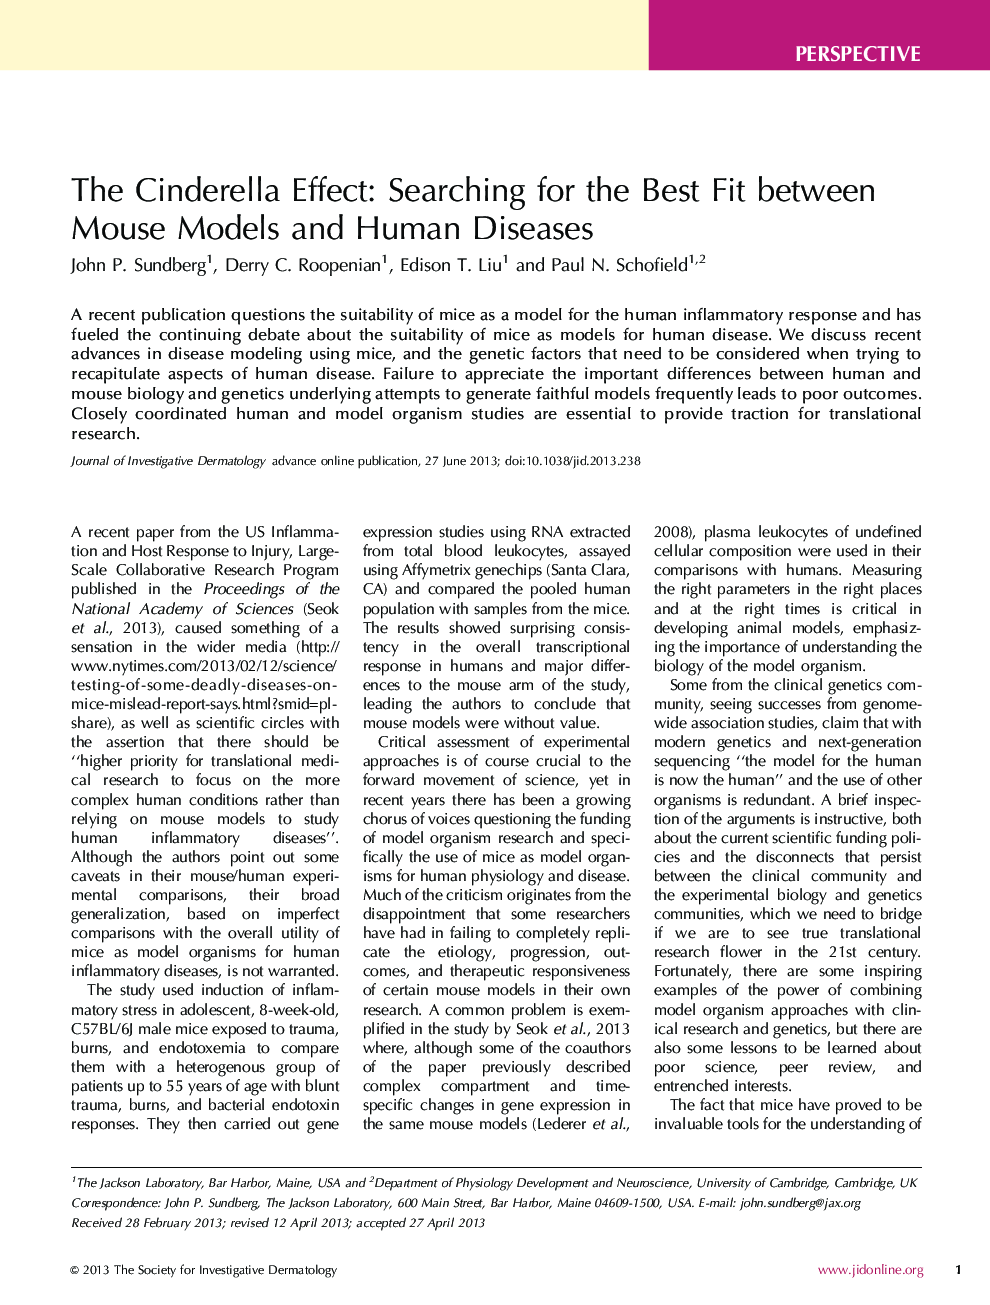 The Cinderella Effect: Searching for the Best Fit between Mouse Models and Human Diseases